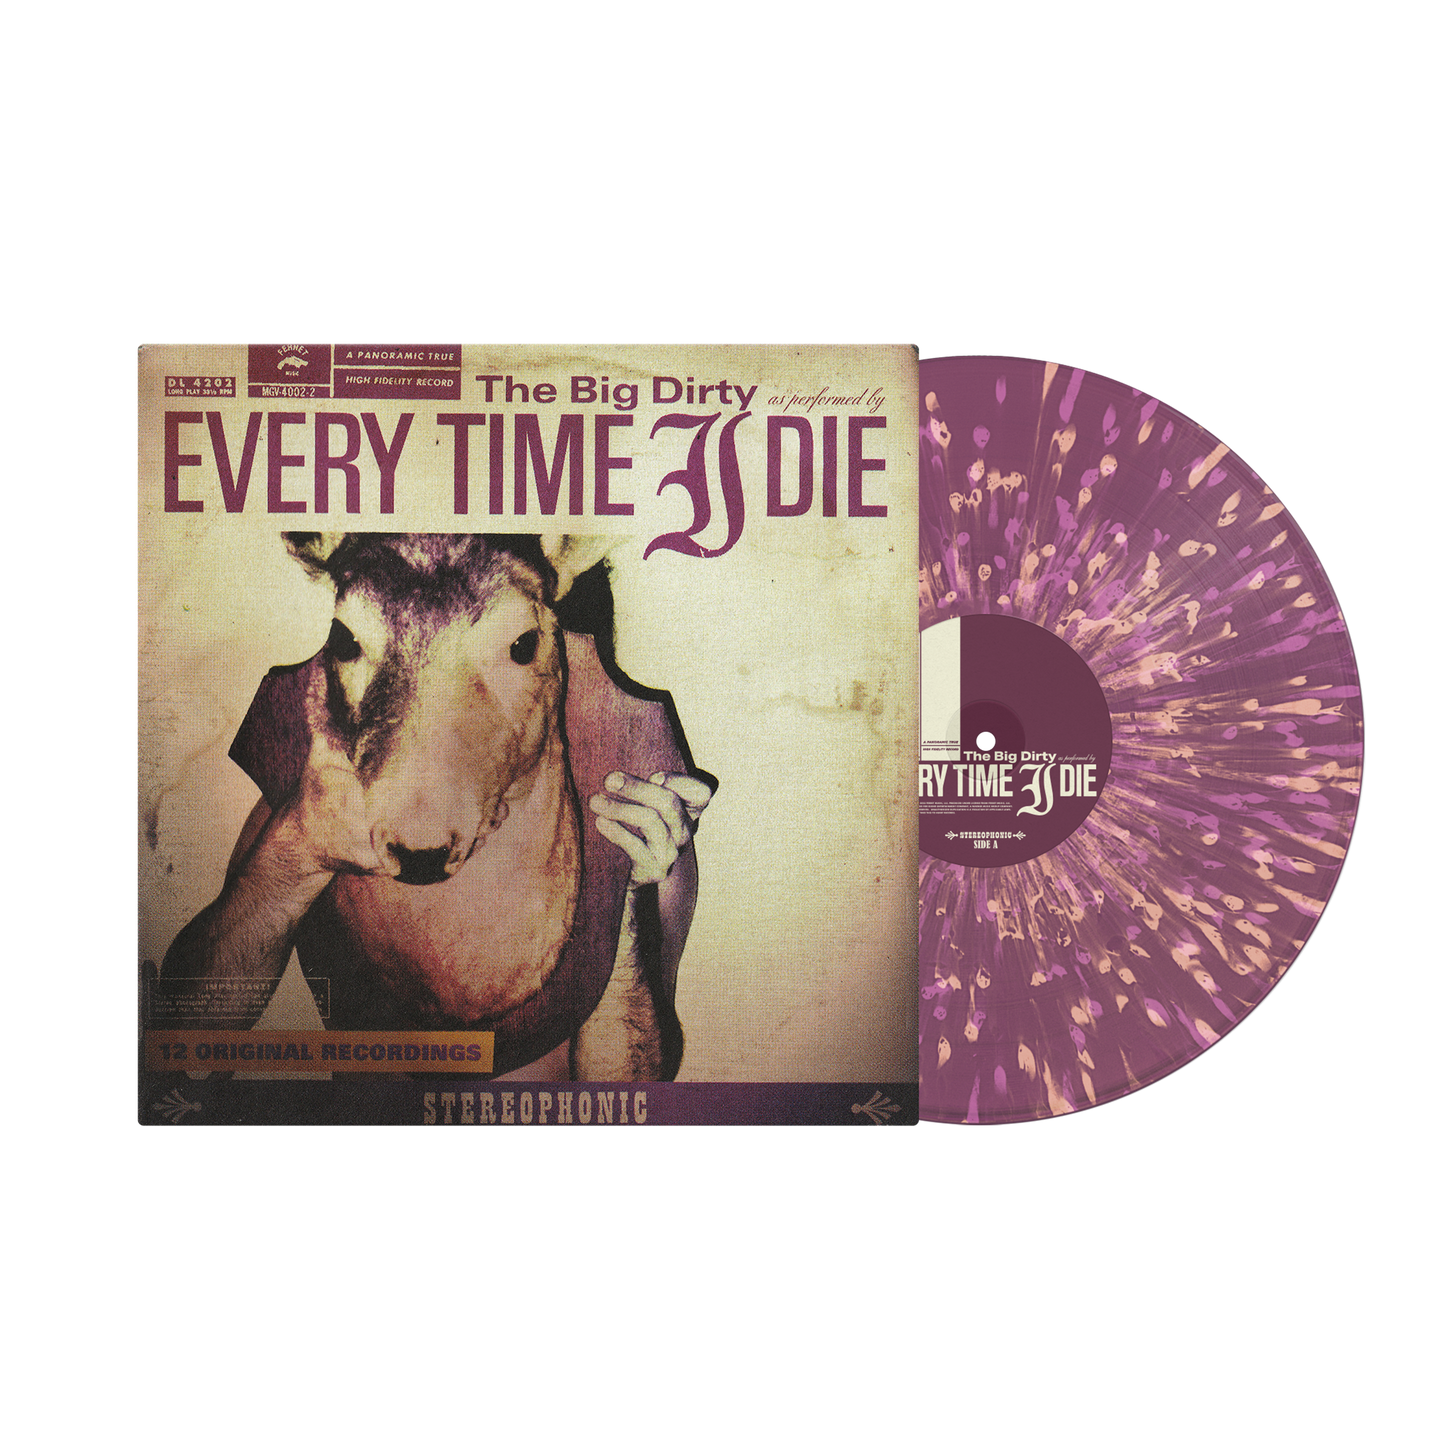 Every Time I Die - "The Big Dirty"